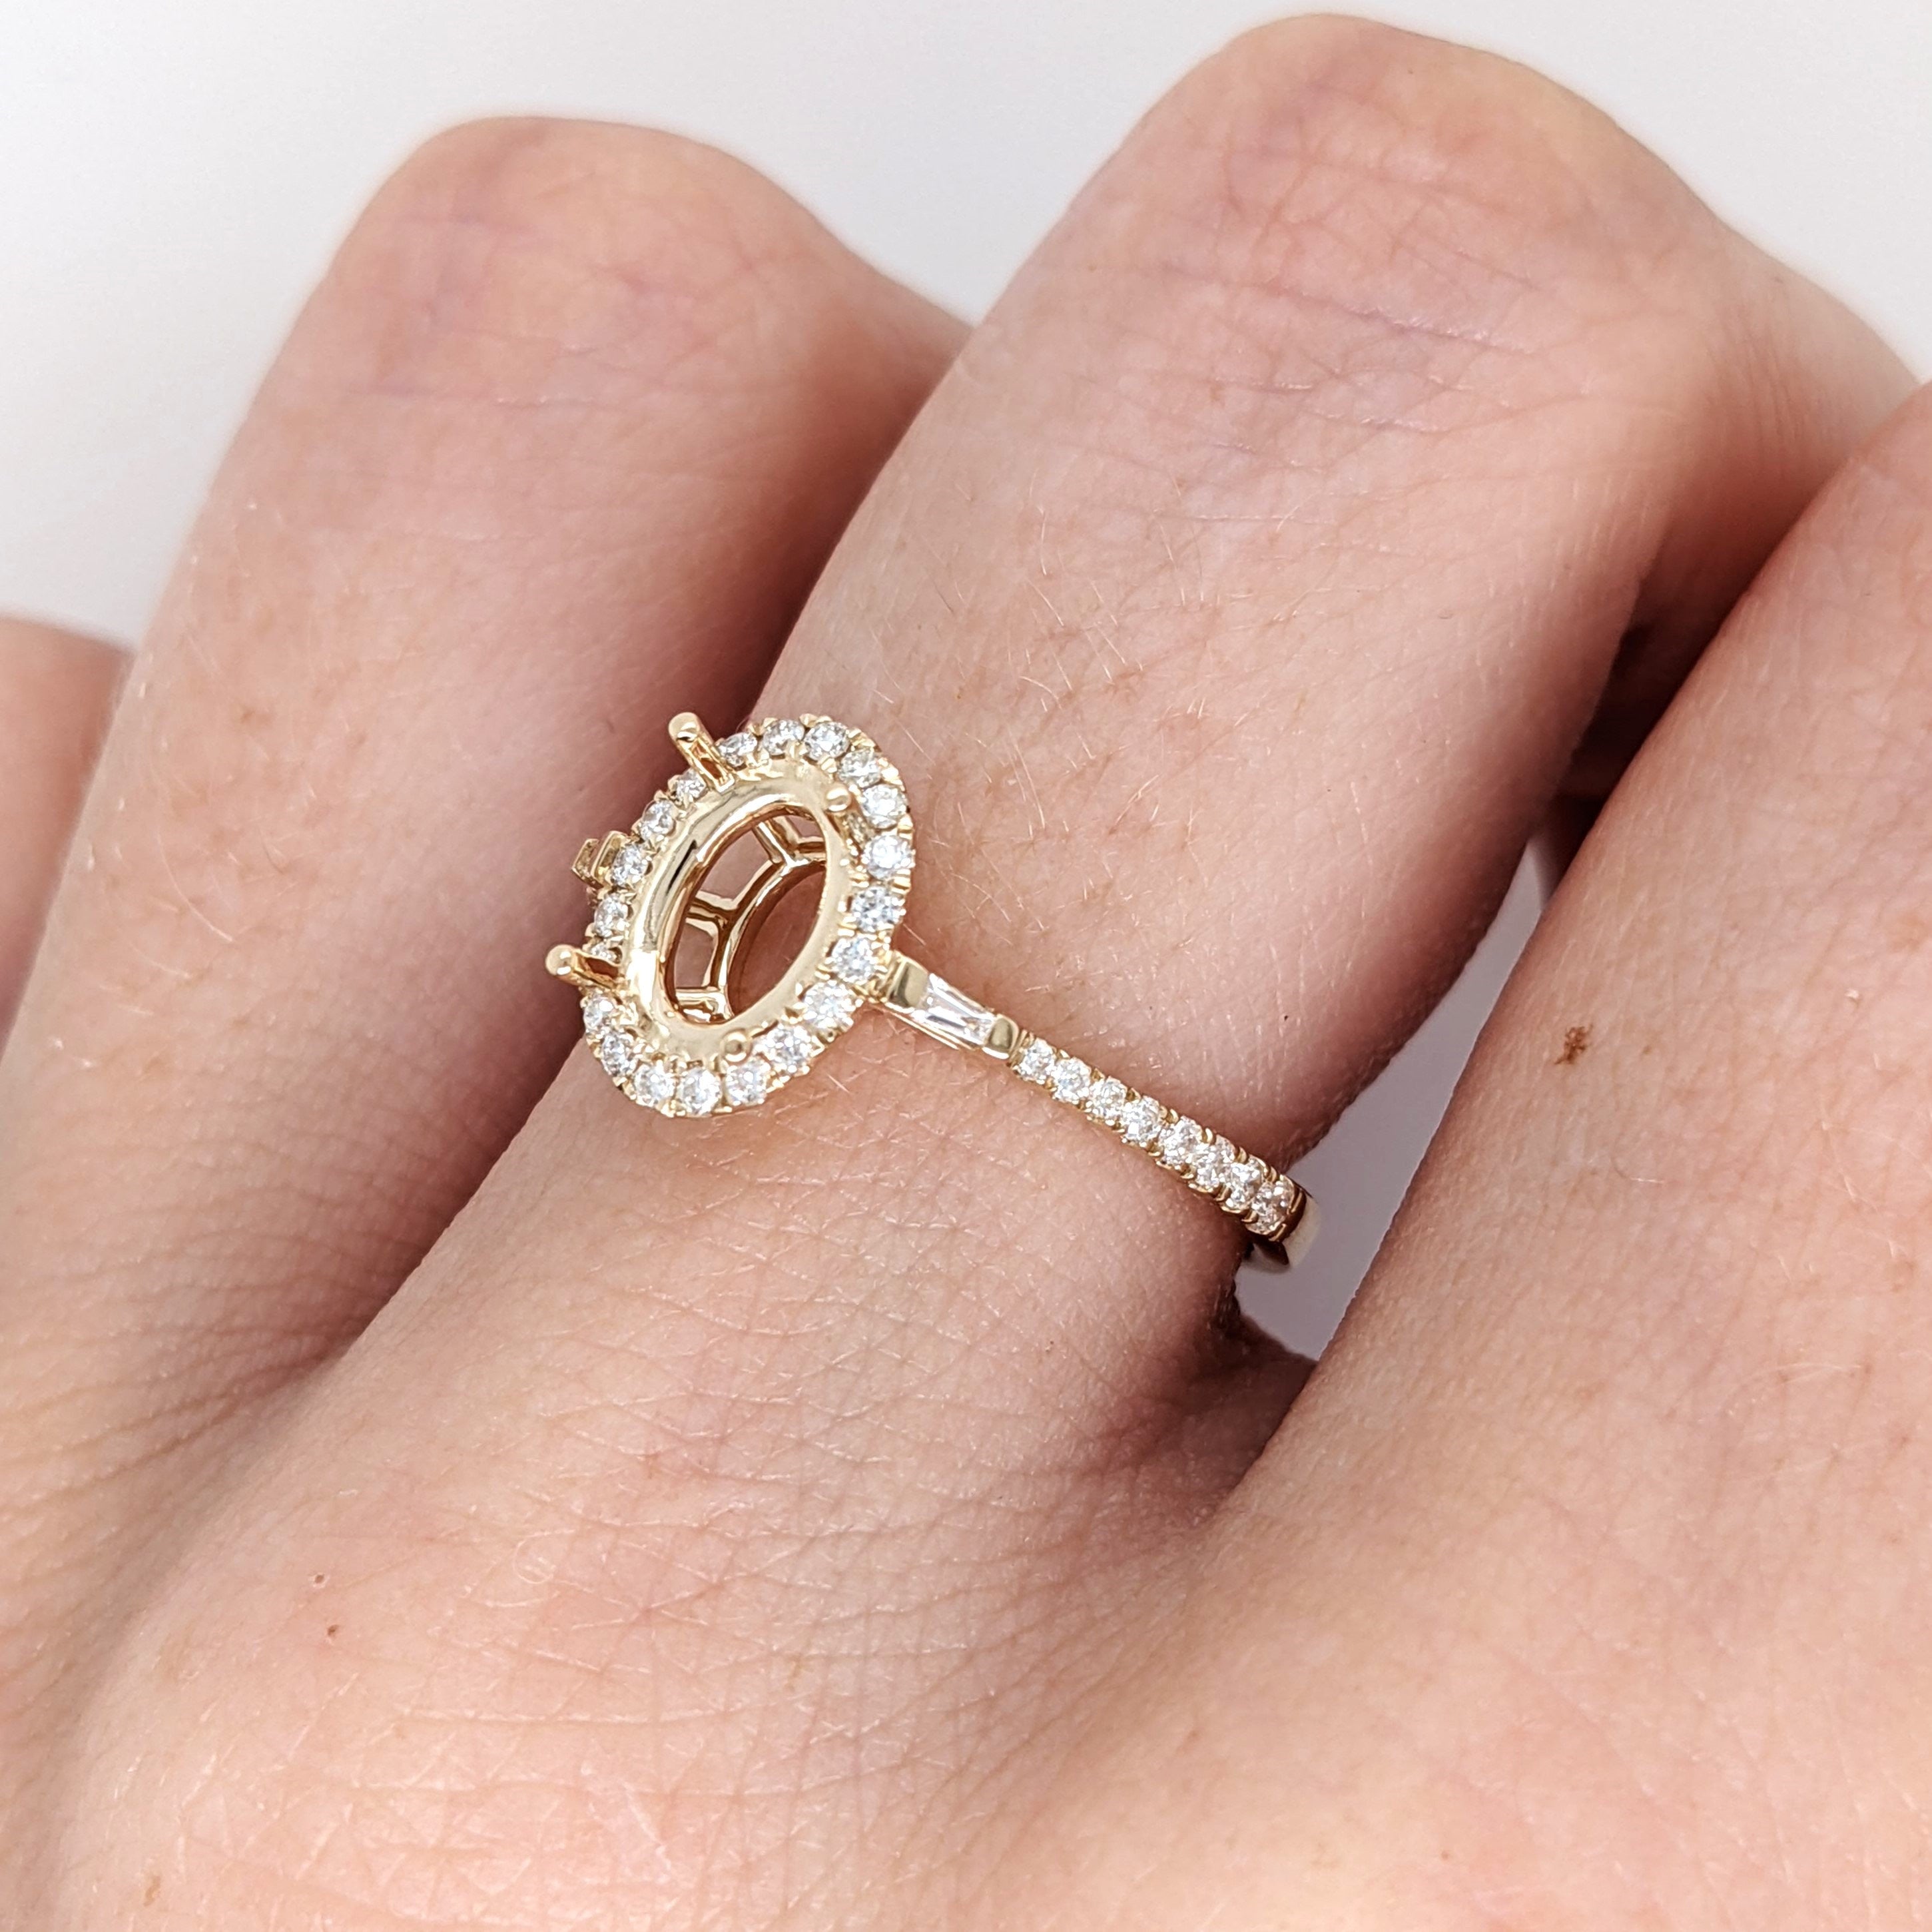 Engagement Ring Setting in 14K Solid White, Yellow, or Rose Gold with Diamond Halo & Baguette Diamonds || Oval 10x8mm || Customizable